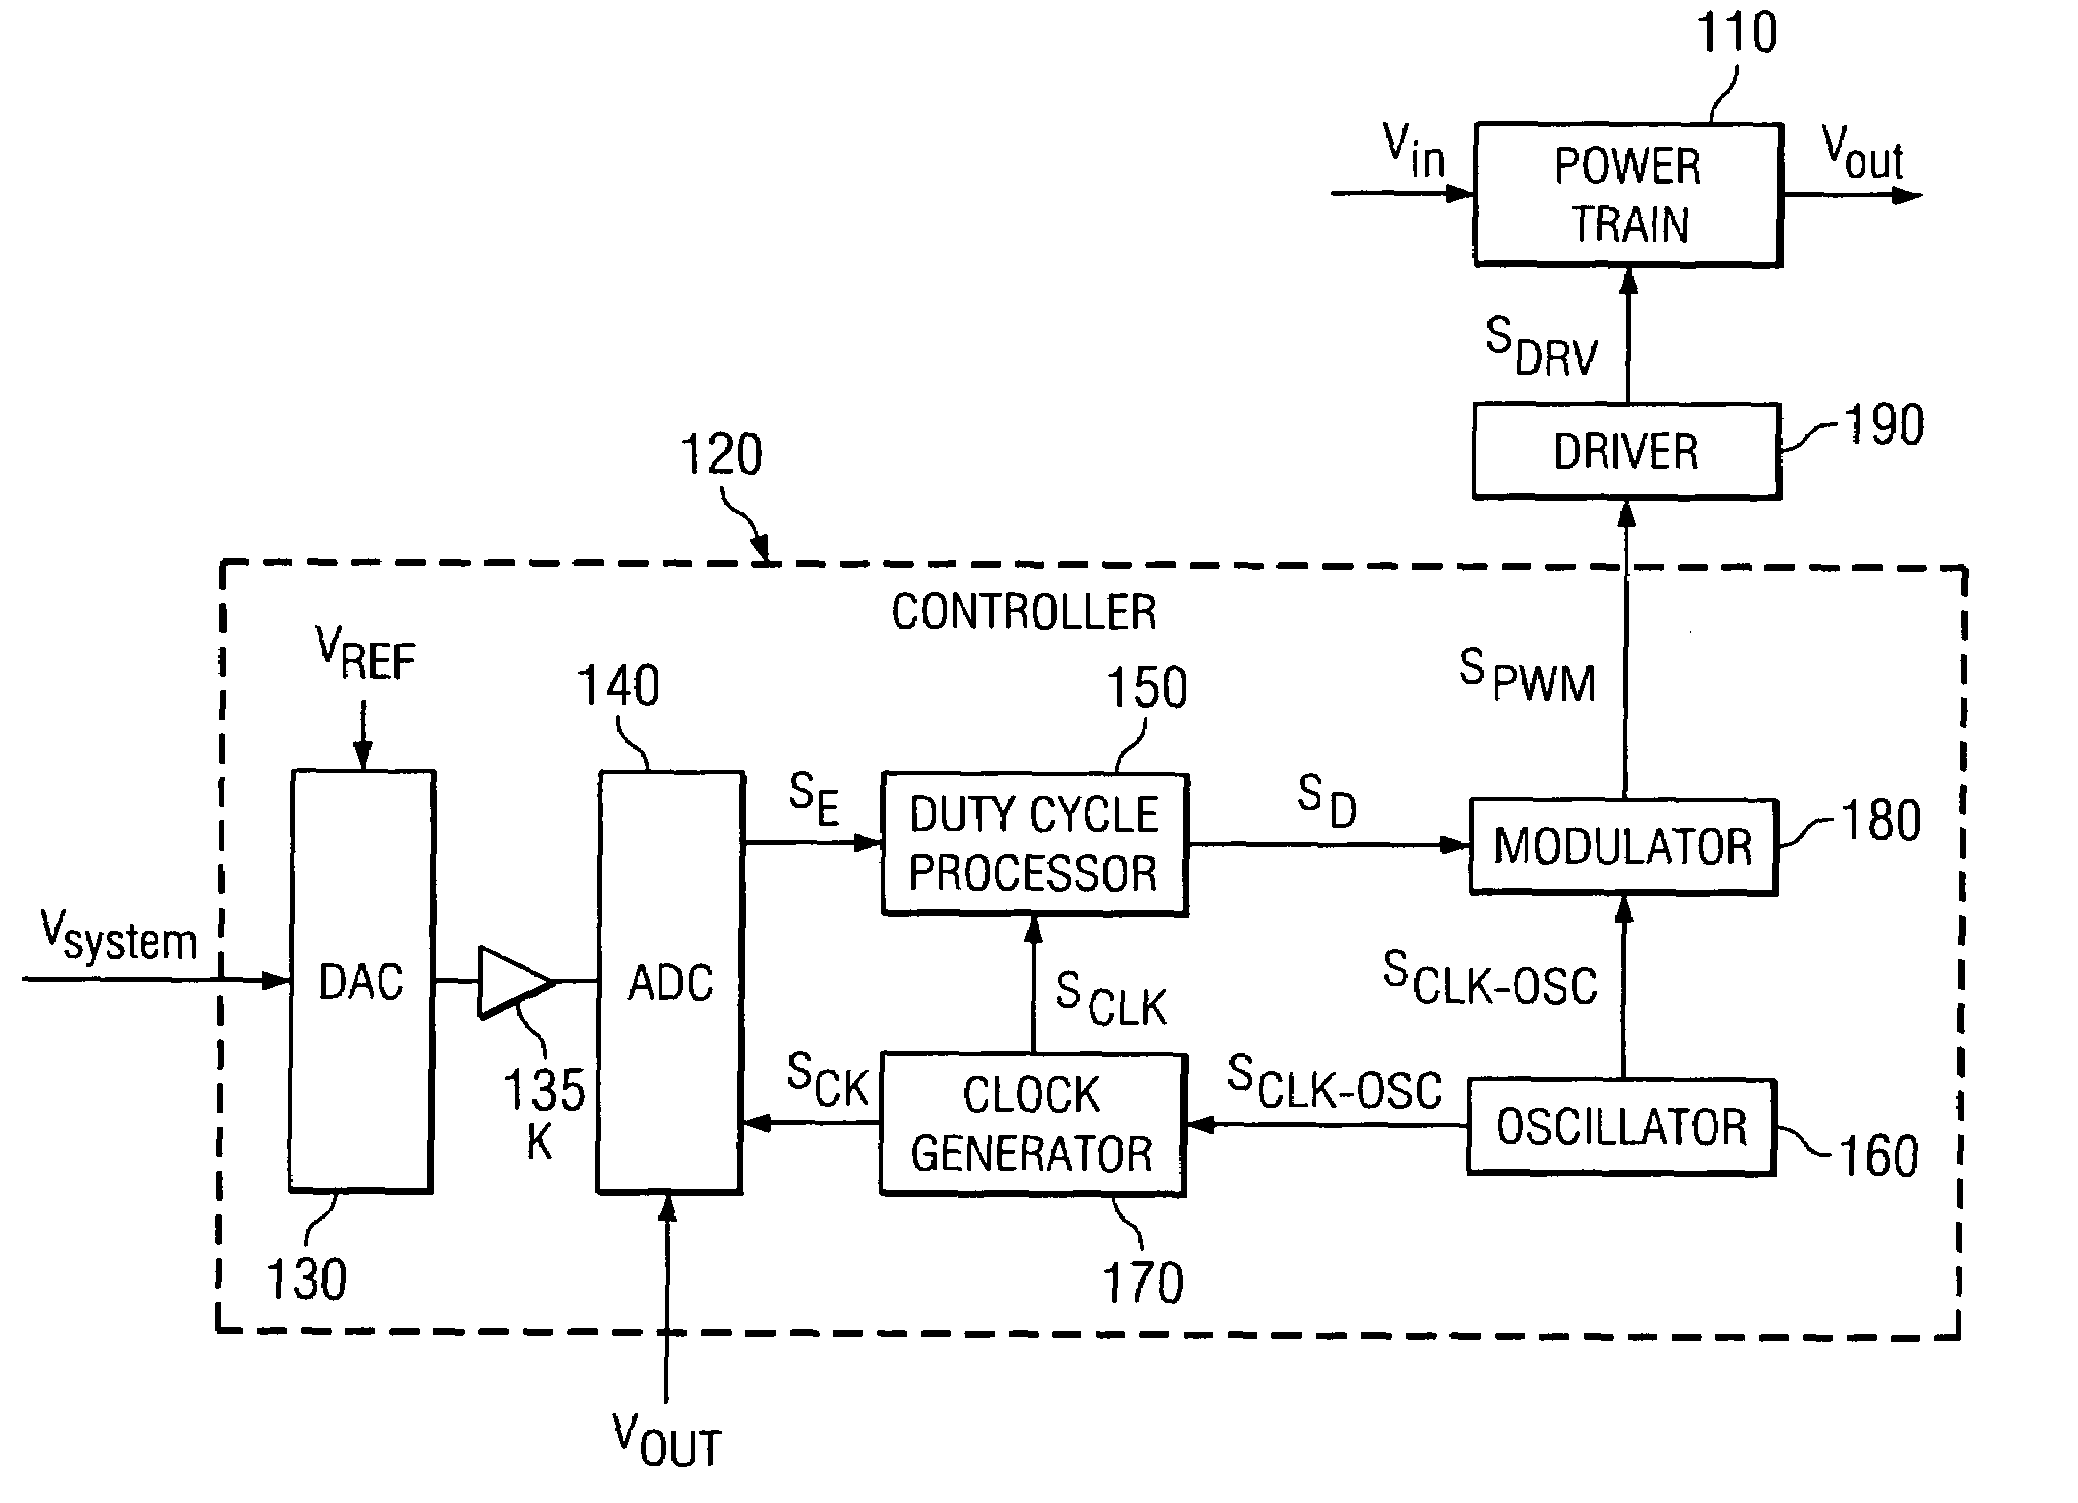 Controller for a power converter and a method of controlling a switch thereof